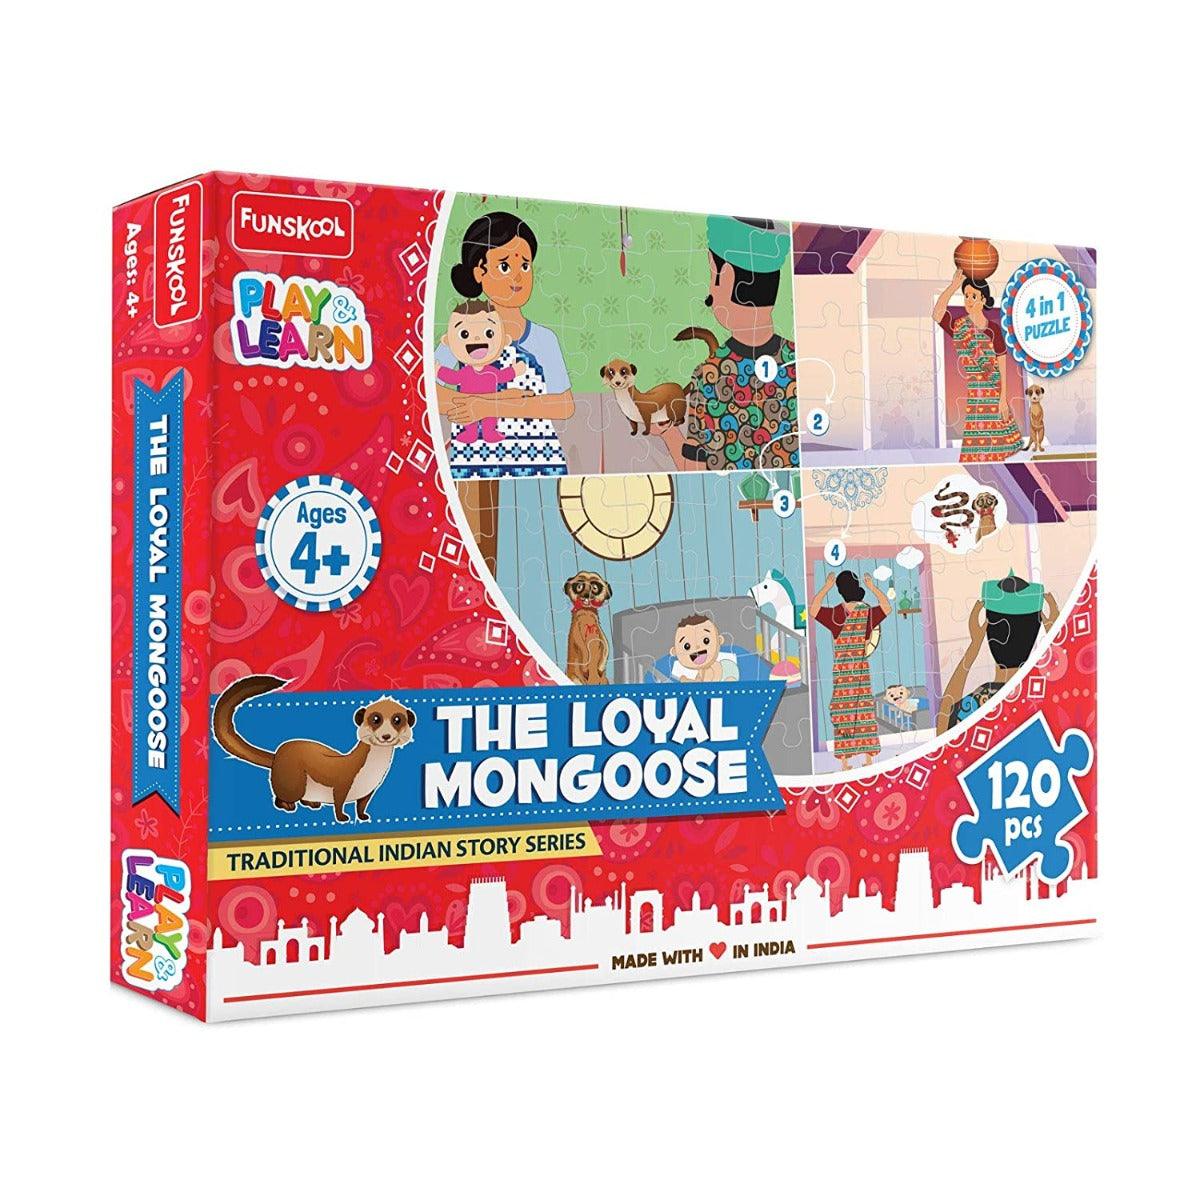 Funskool Traditional Indian Story Series - The Loyal Mongoose Puzzle